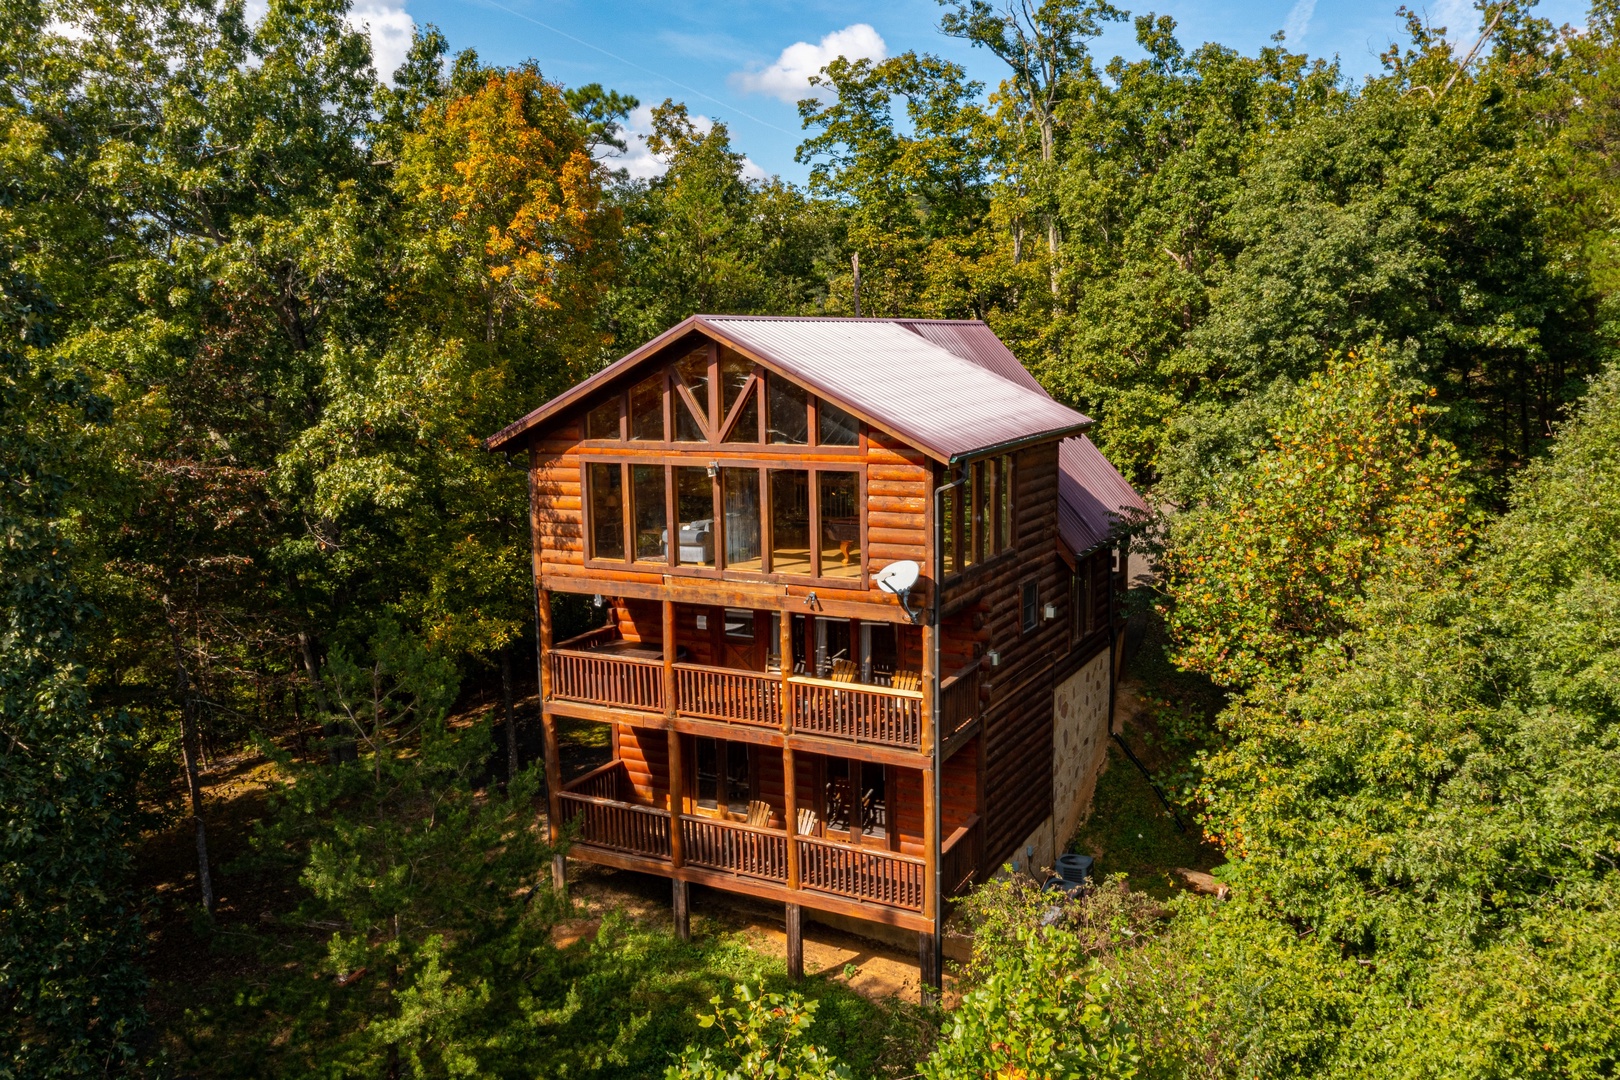 External side view at The Great Outdoors, a 3 bedroom cabin rental located in Pigeon Forge